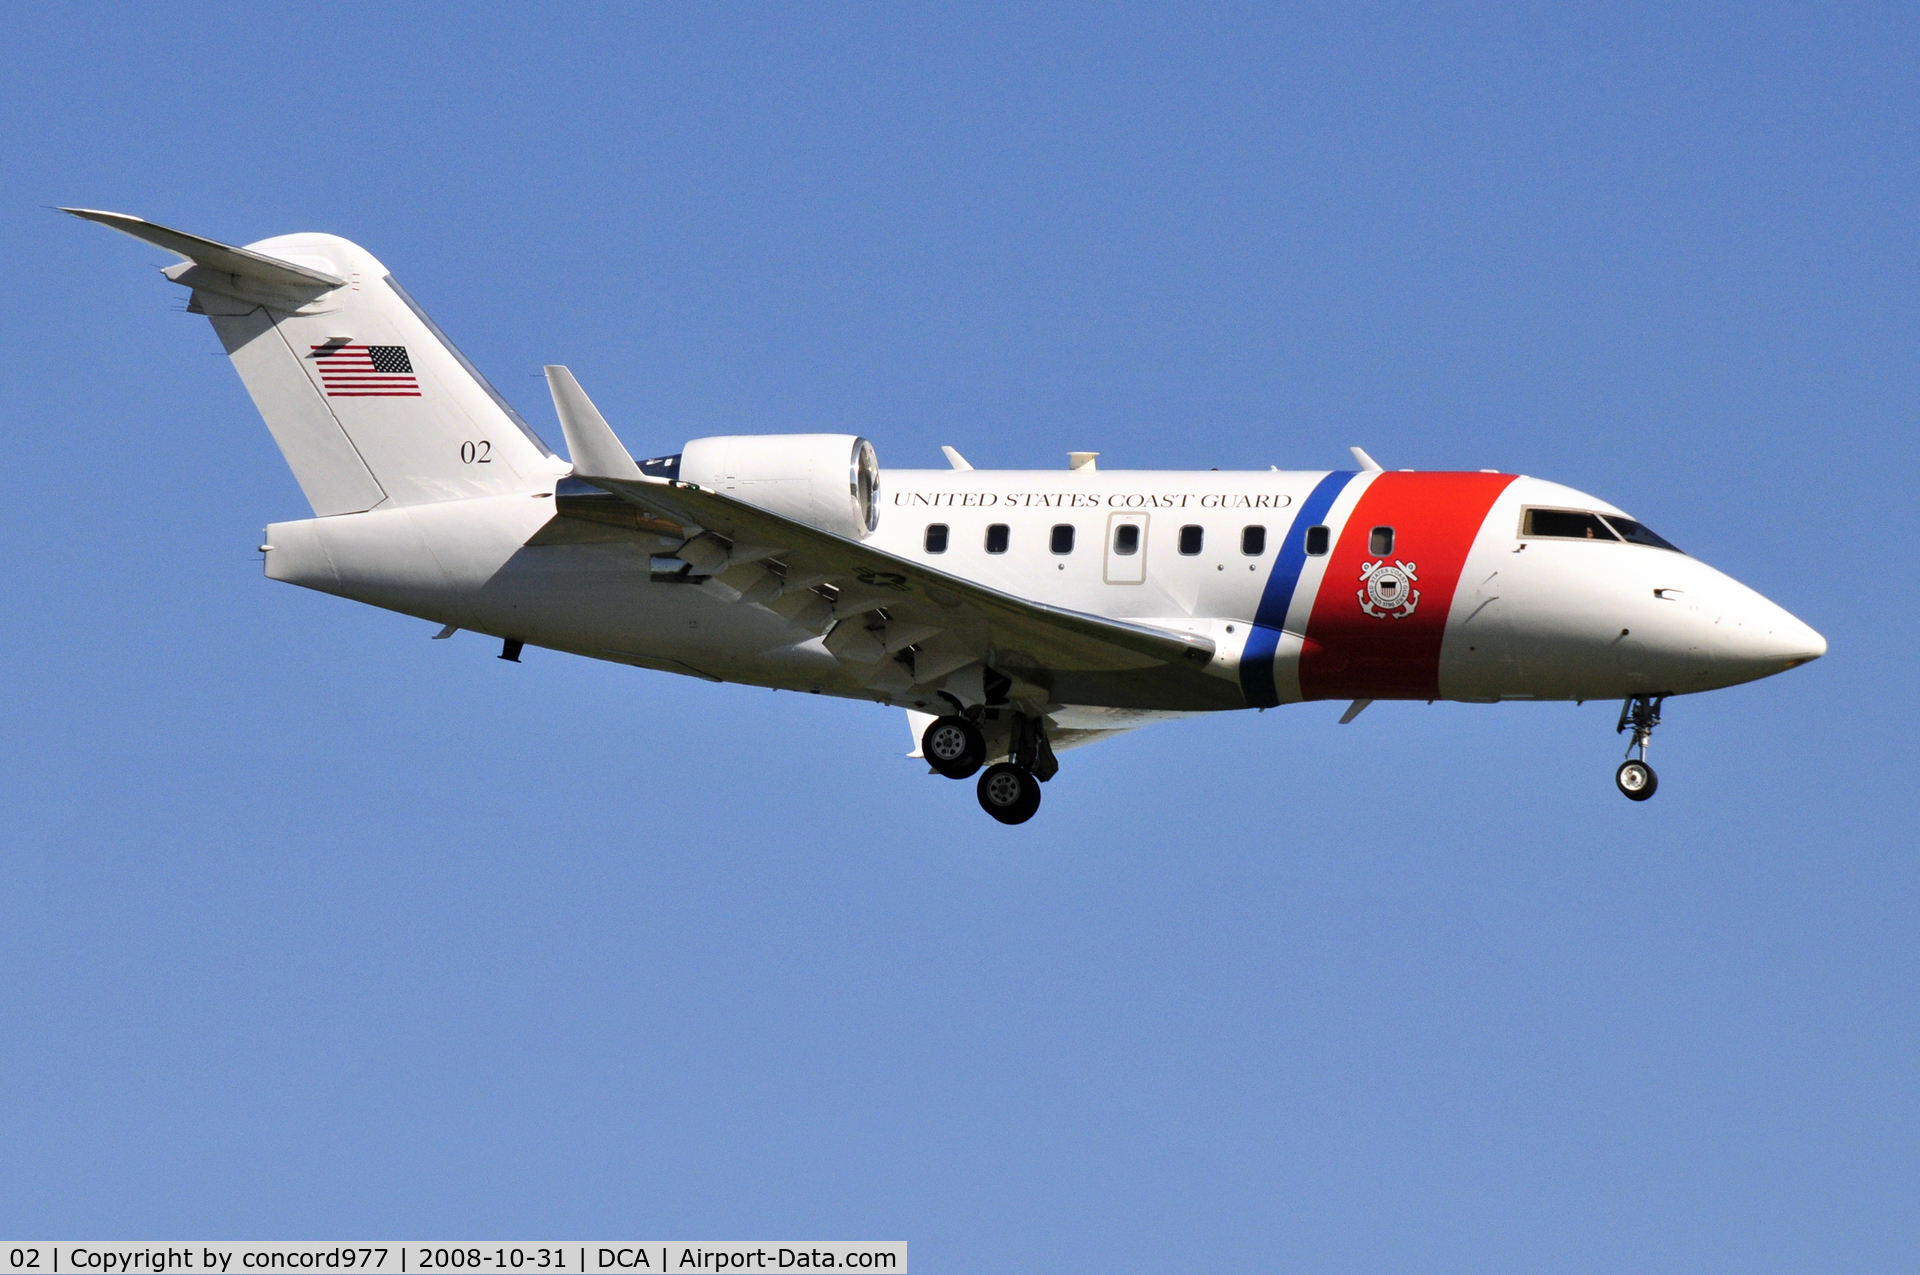 02, 2005 Bombardier C-143A Challenger (604/CL-600-2B16) C/N 5427, U.S. Coast Guard - frequent visitor to KDCA